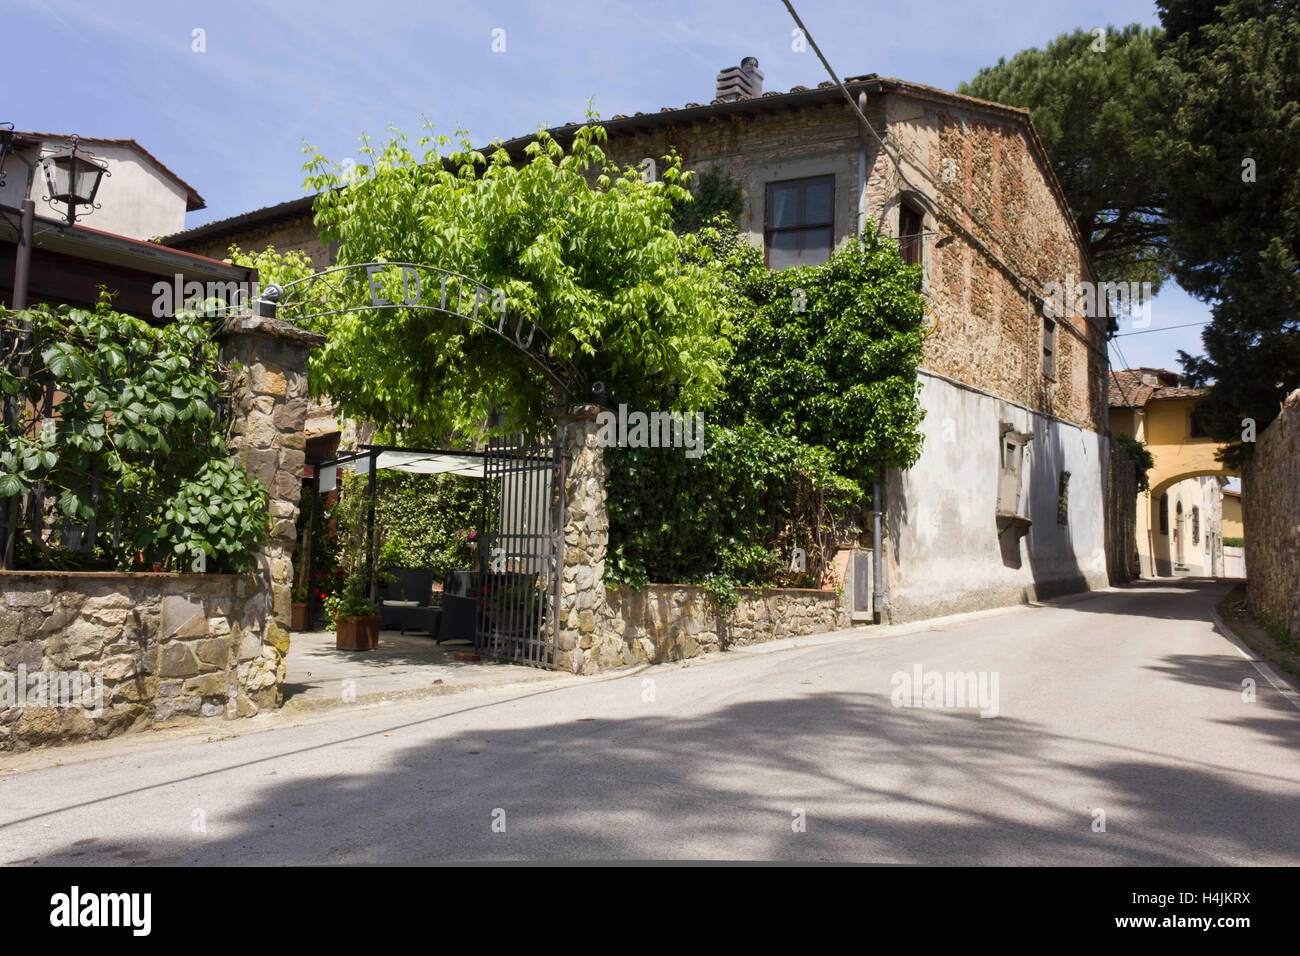 LASTRA A SIGNA, ITALY - MAY 21 2016: External view of the entrance of historical Edy Piu traditional restaurant on Tuscan Hills Stock Photo